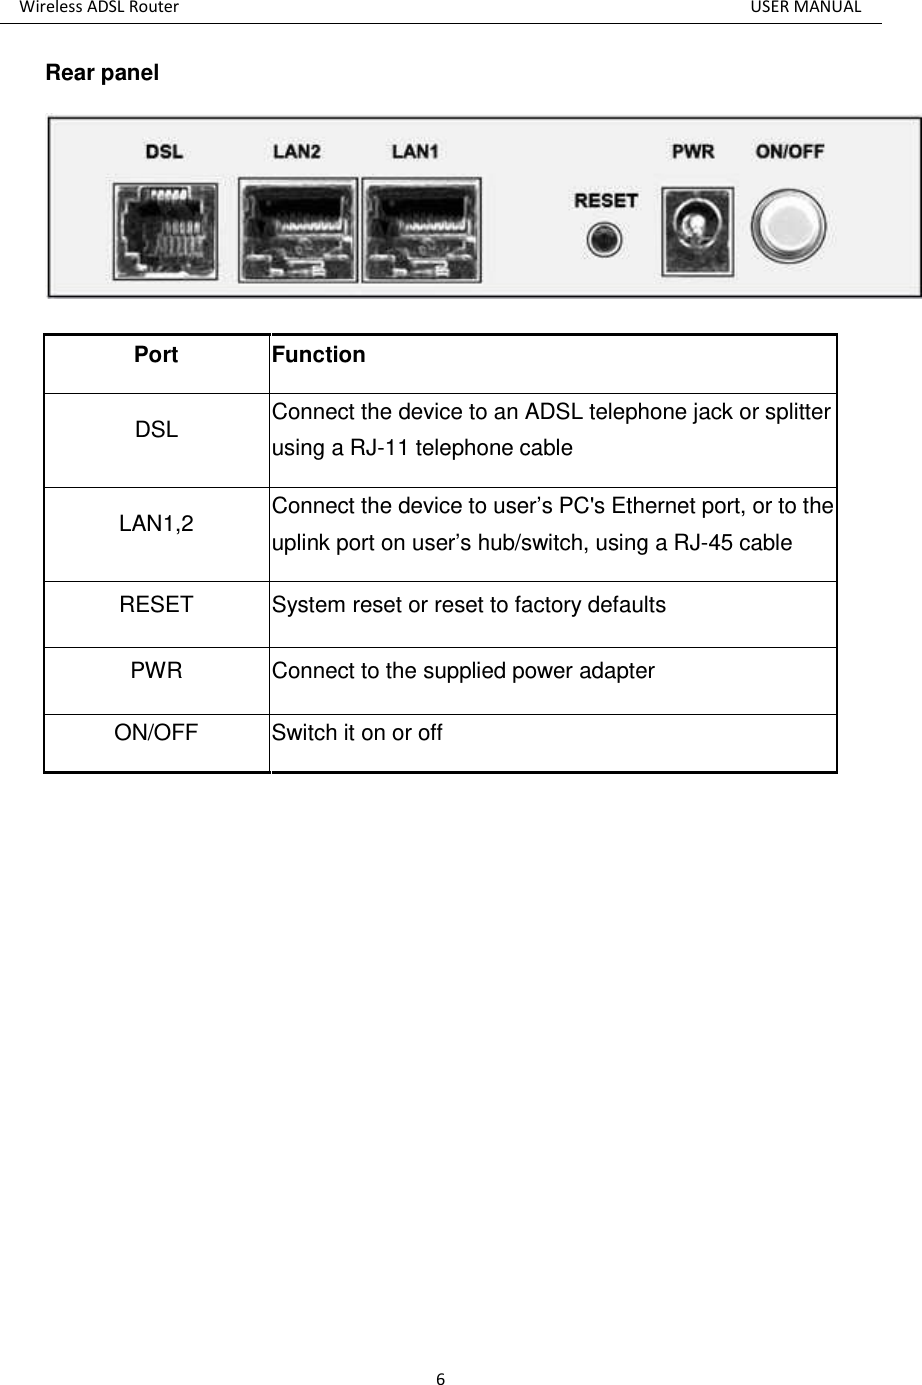 Wireless ADSL Router          USER MANUAL 6 Rear panel          Port  Function DSL Connect the device to an ADSL telephone jack or splitter using a RJ-11 telephone cable LAN1,2 Connect the device to user’s PC&apos;s Ethernet port, or to the uplink port on user’s hub/switch, using a RJ-45 cable RESET  System reset or reset to factory defaults PWR  Connect to the supplied power adapter ON/OFF Switch it on or off 